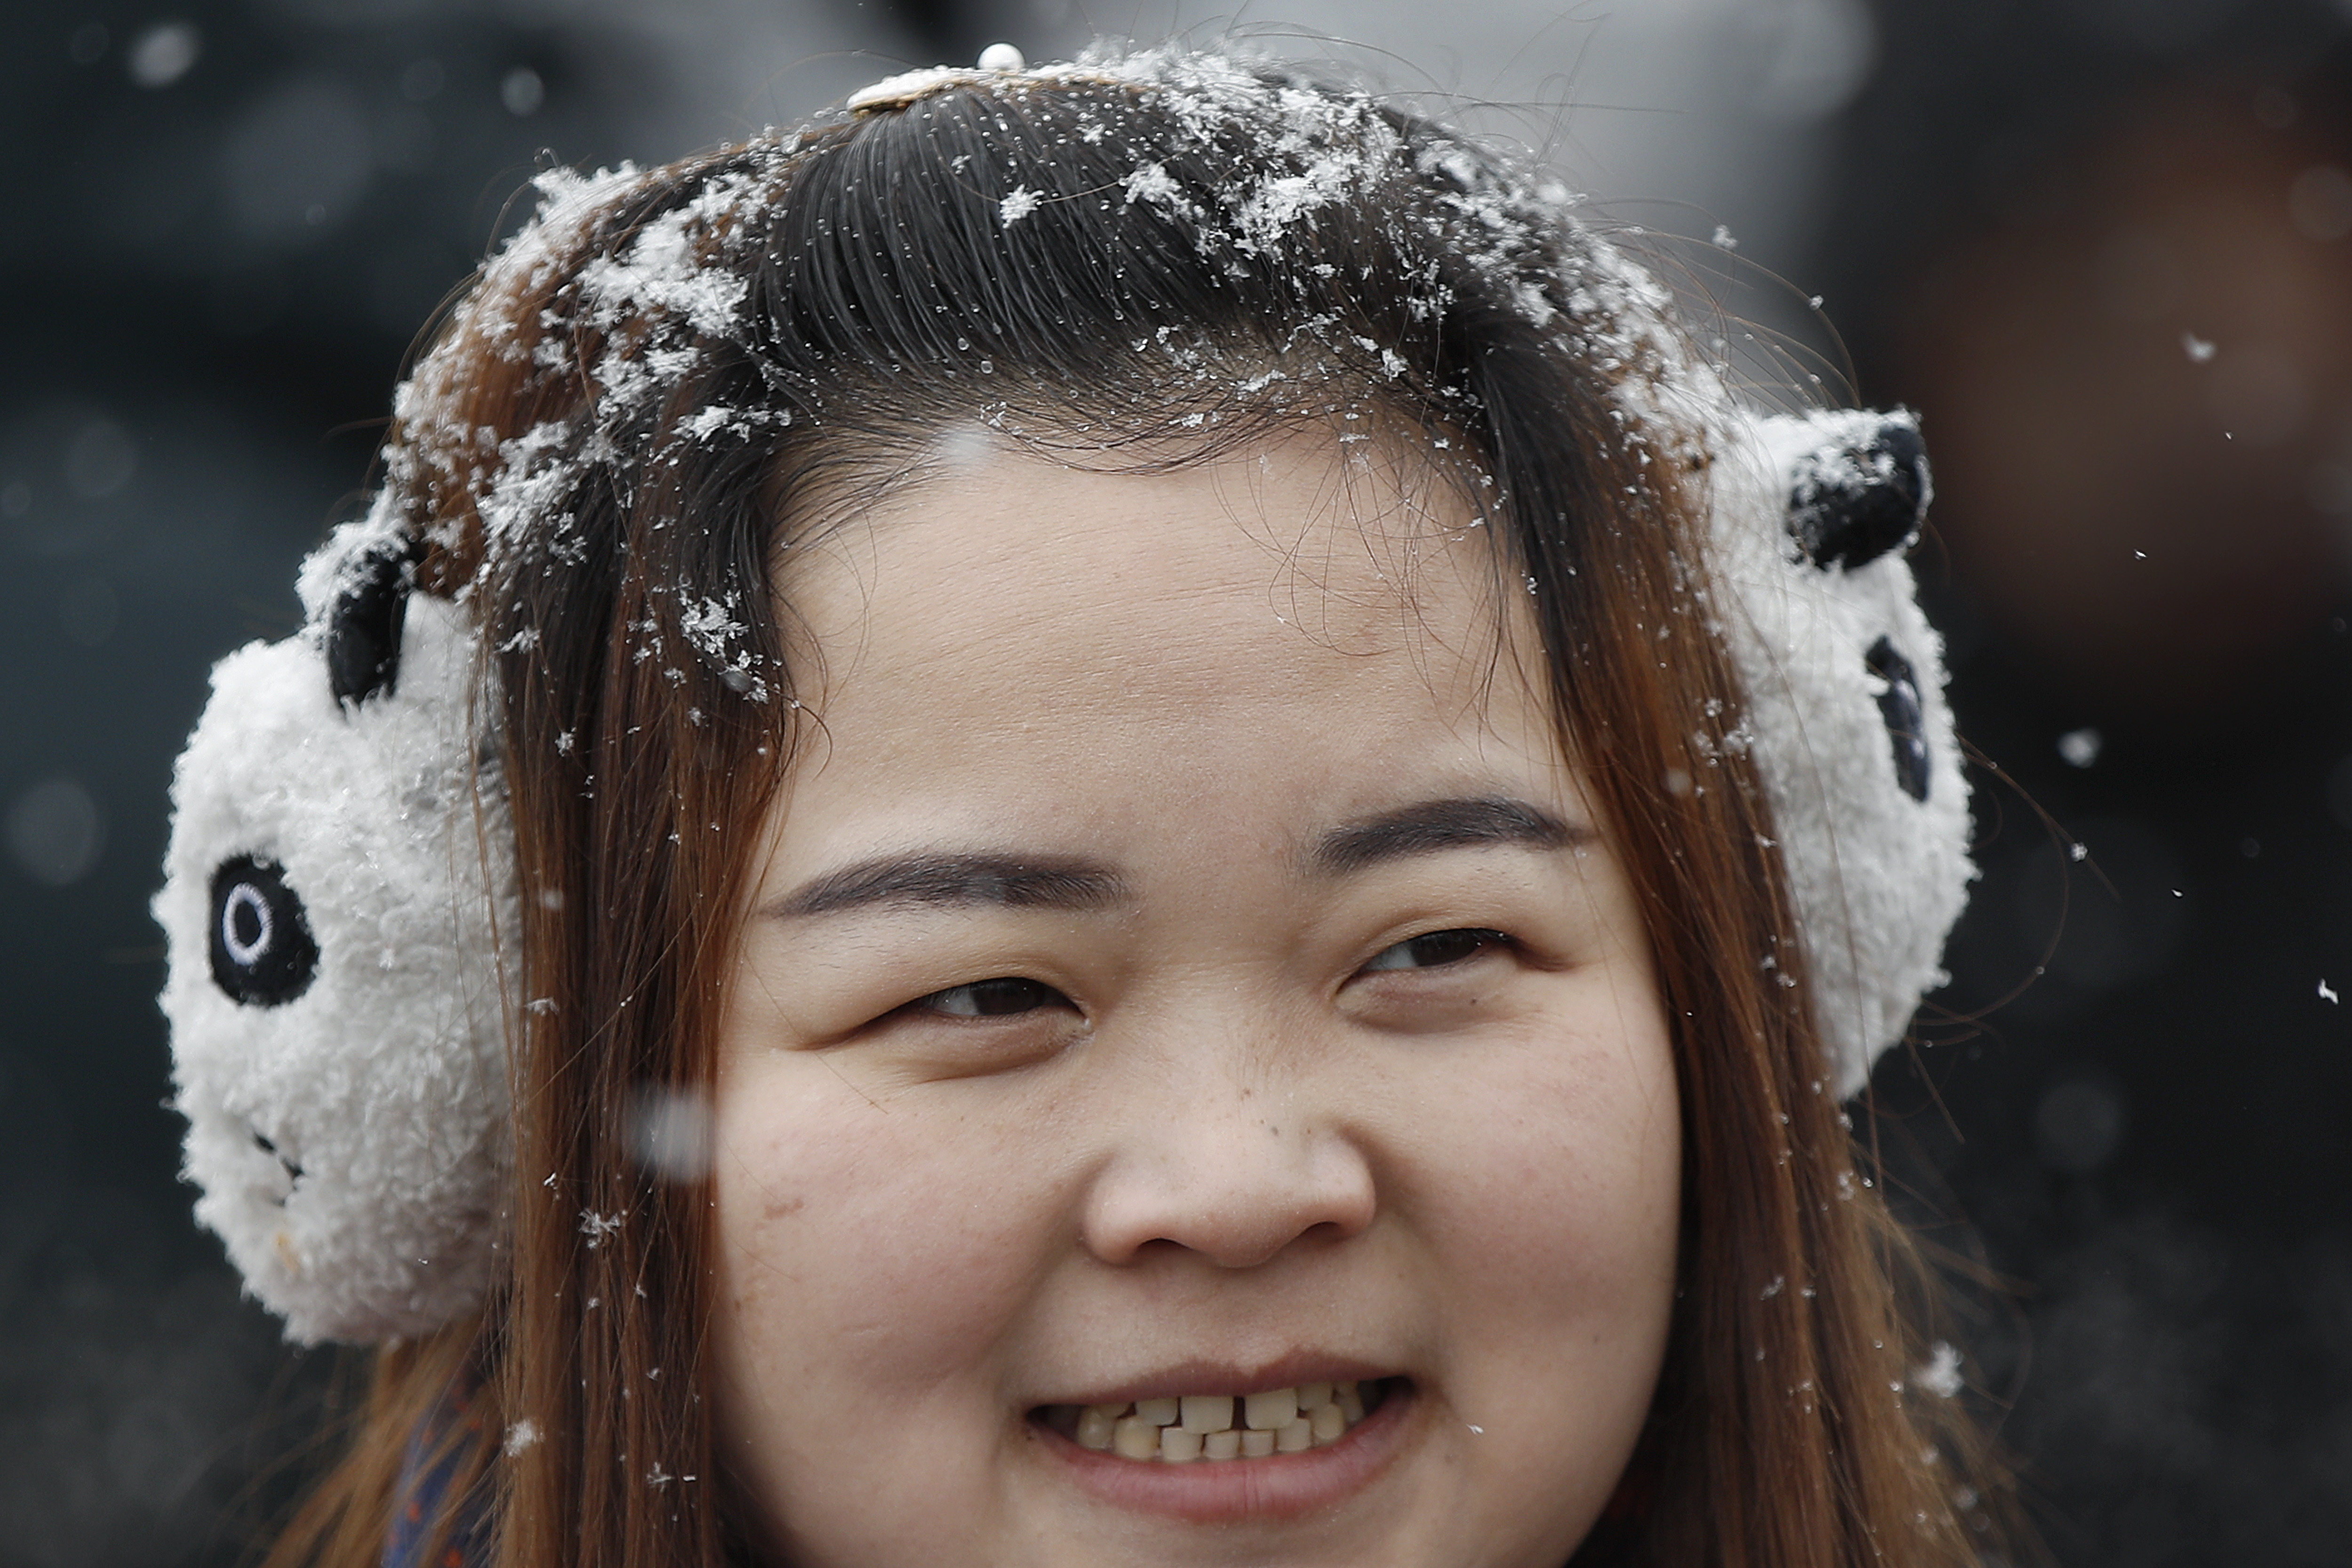 A woman wearing a panda ear cover during a visit to Tiananmen Gate as snow fall in Beijing, Tuesday, Feb. 12, 2019. China's capital is mostly dry in the winter but a storm system brought snow to the city on Tuesday morning. (AP Photo/Andy Wong)